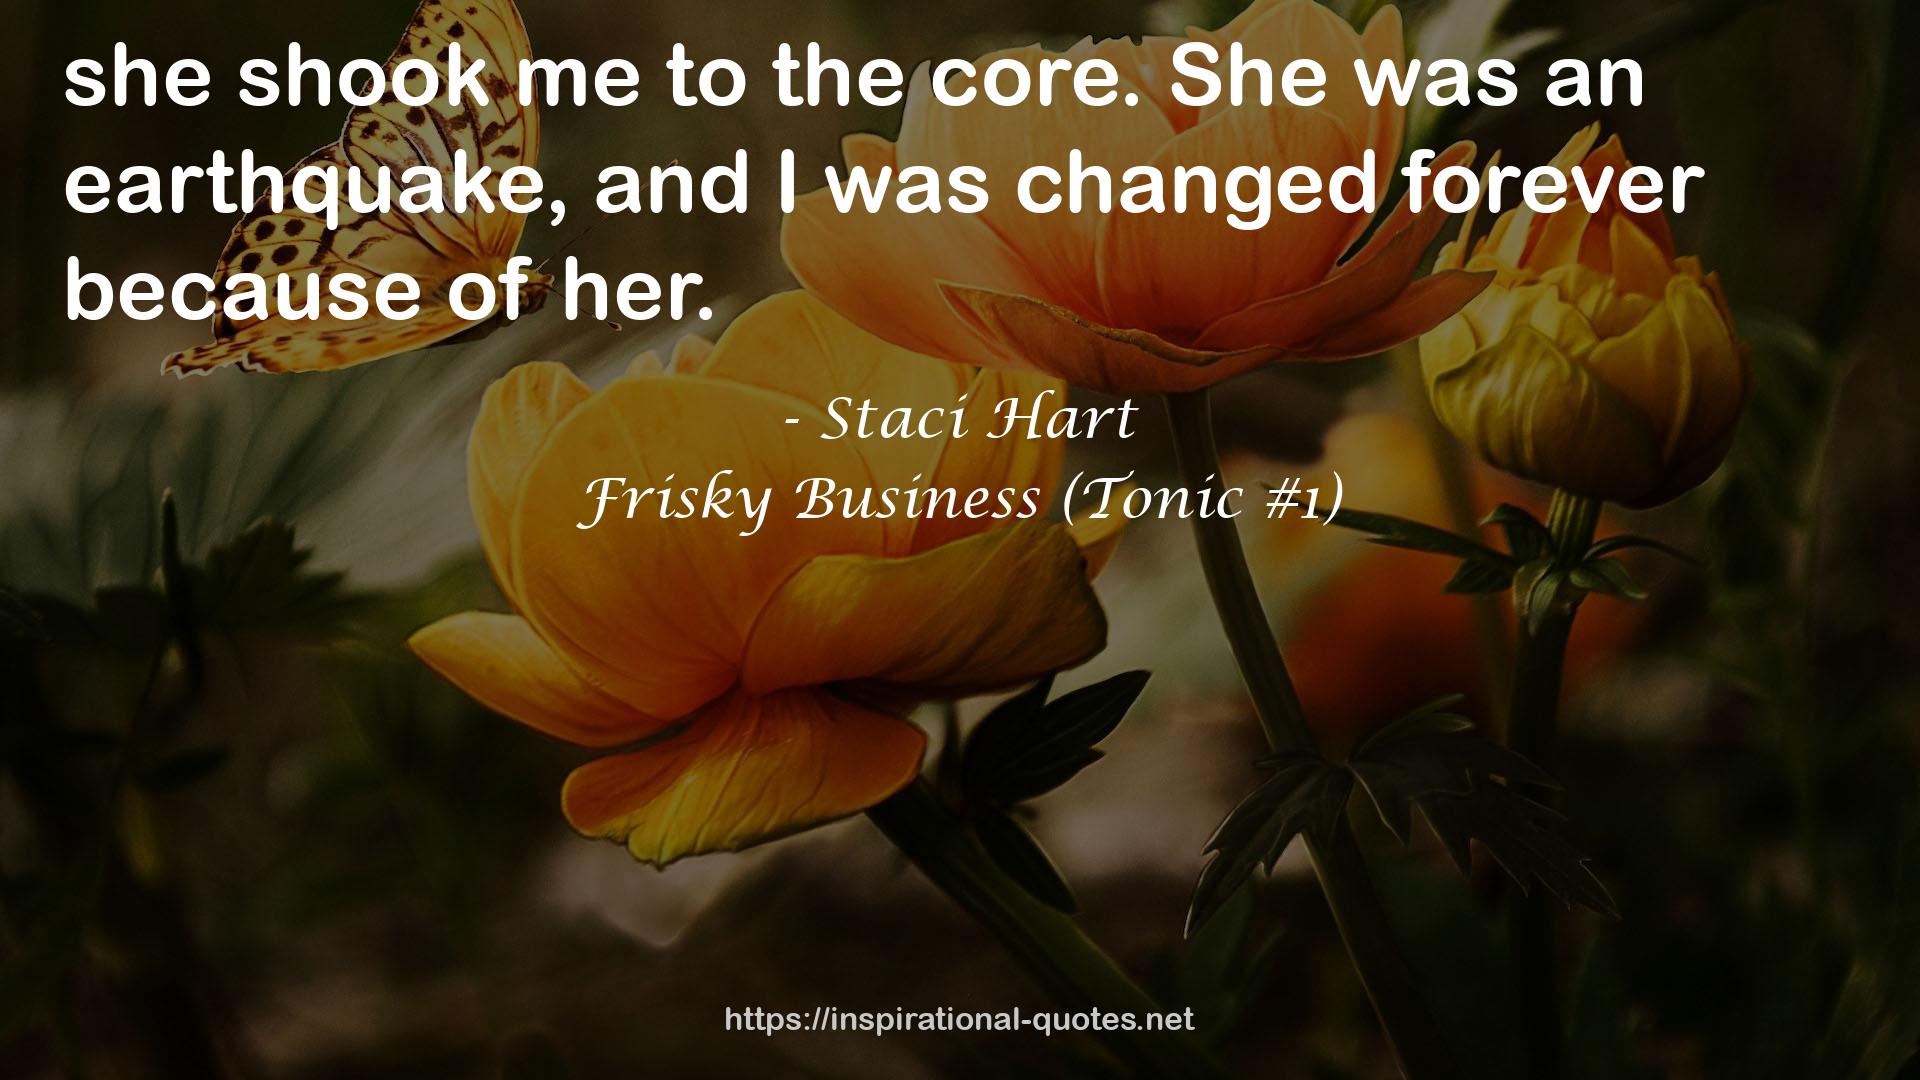 Frisky Business (Tonic #1) QUOTES